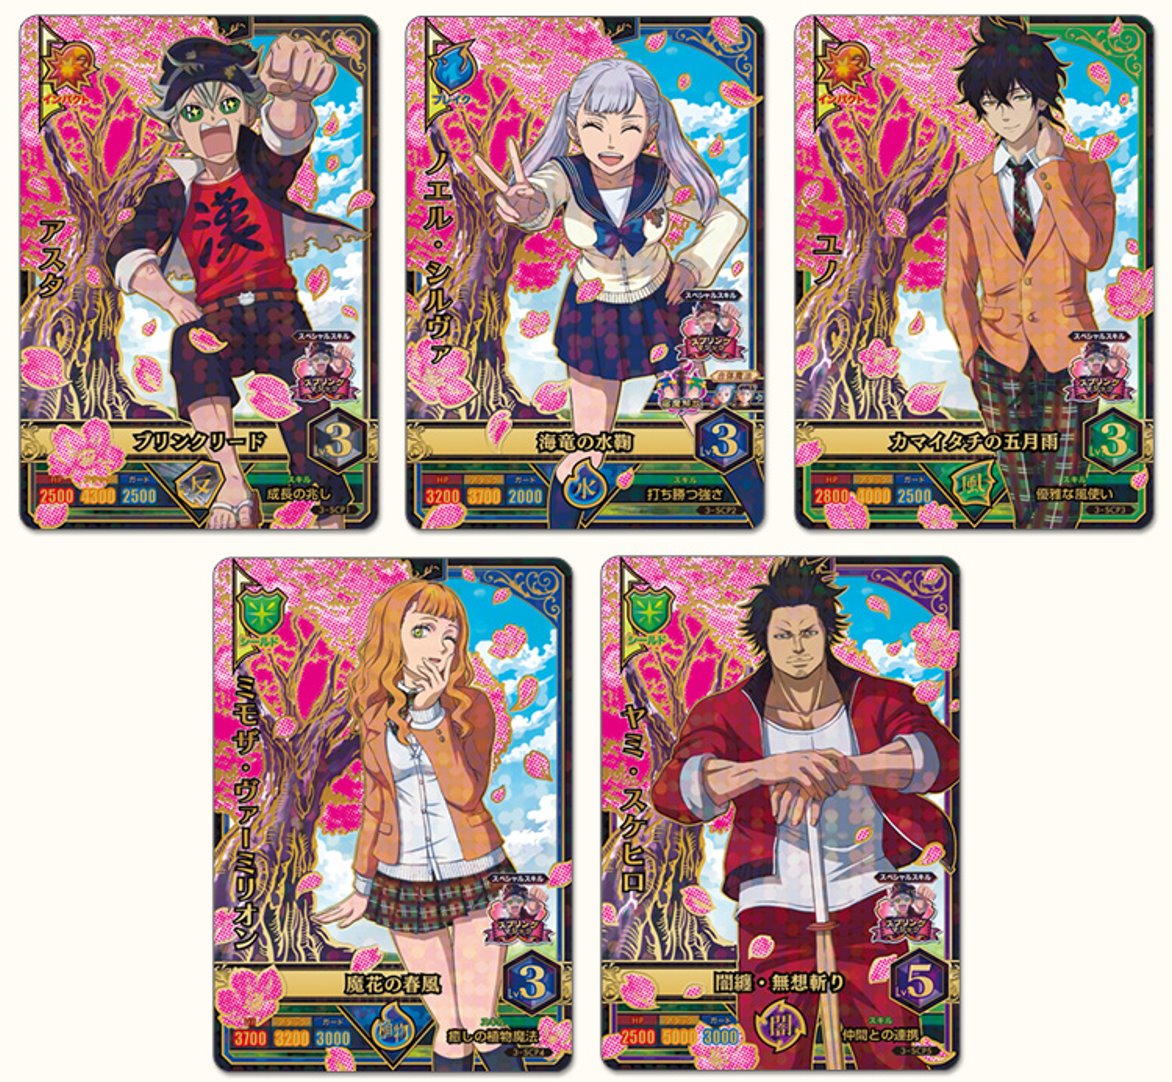 Black Clover with school setting(from Cardass game) | KASKUS